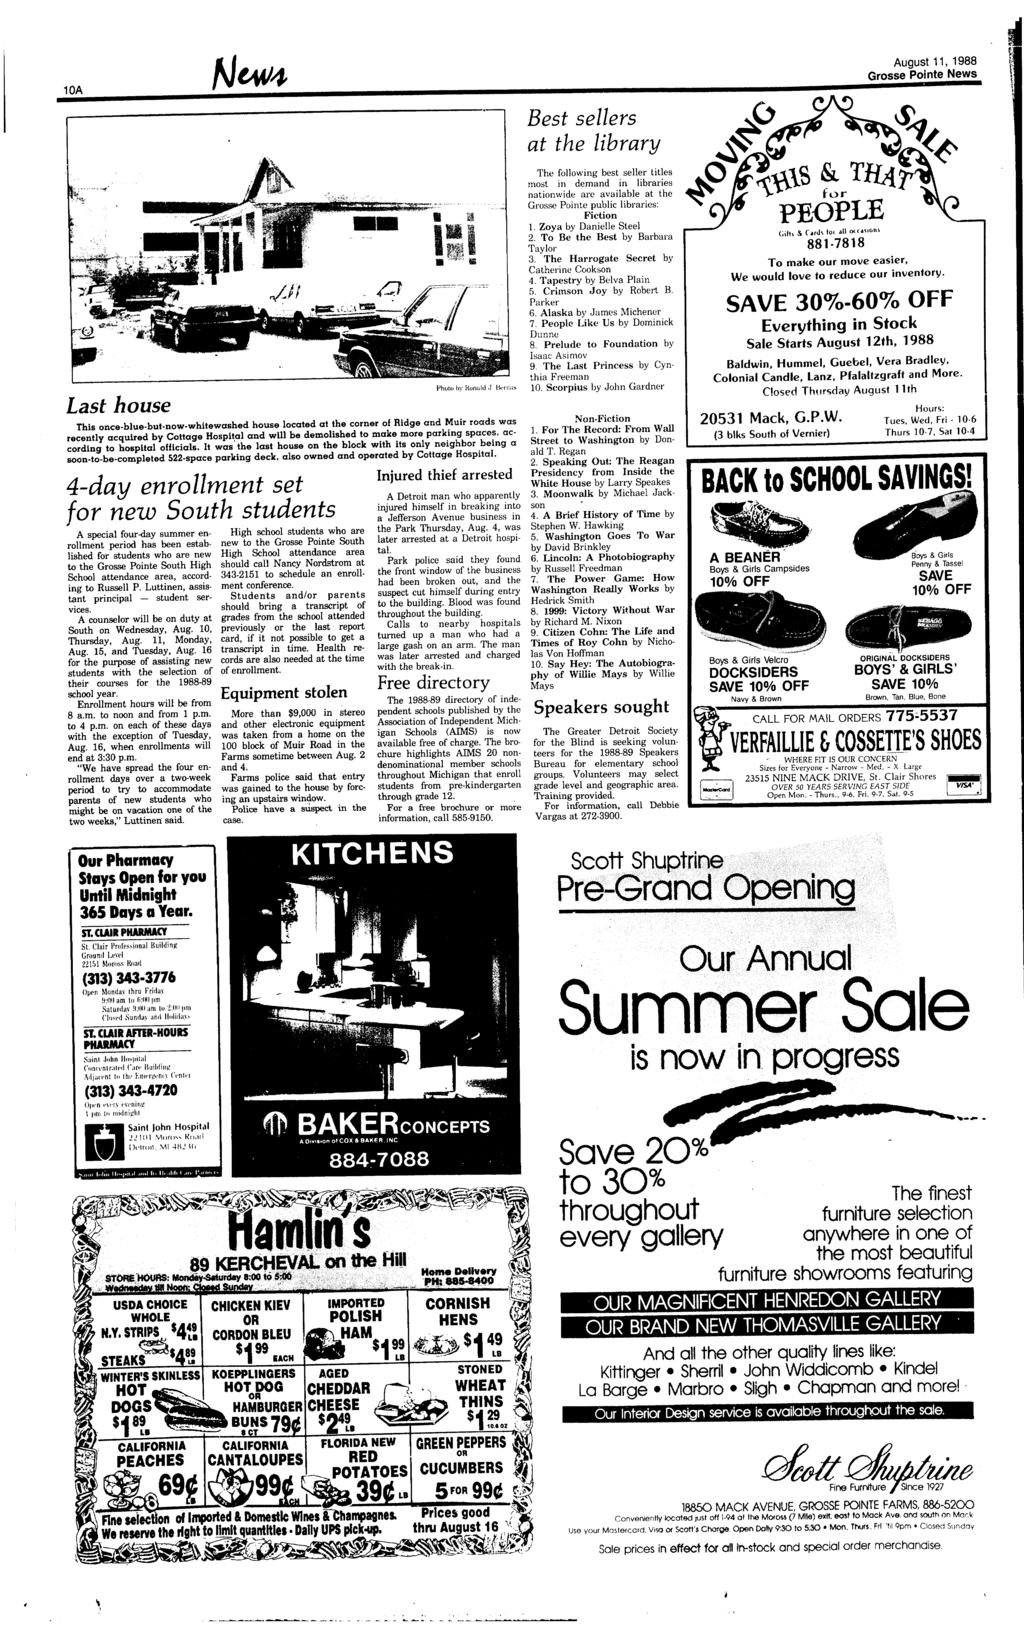 10A Best sellers at the library August 11, 1988 \ Last house A special four-day summer enrollment period has been estab.